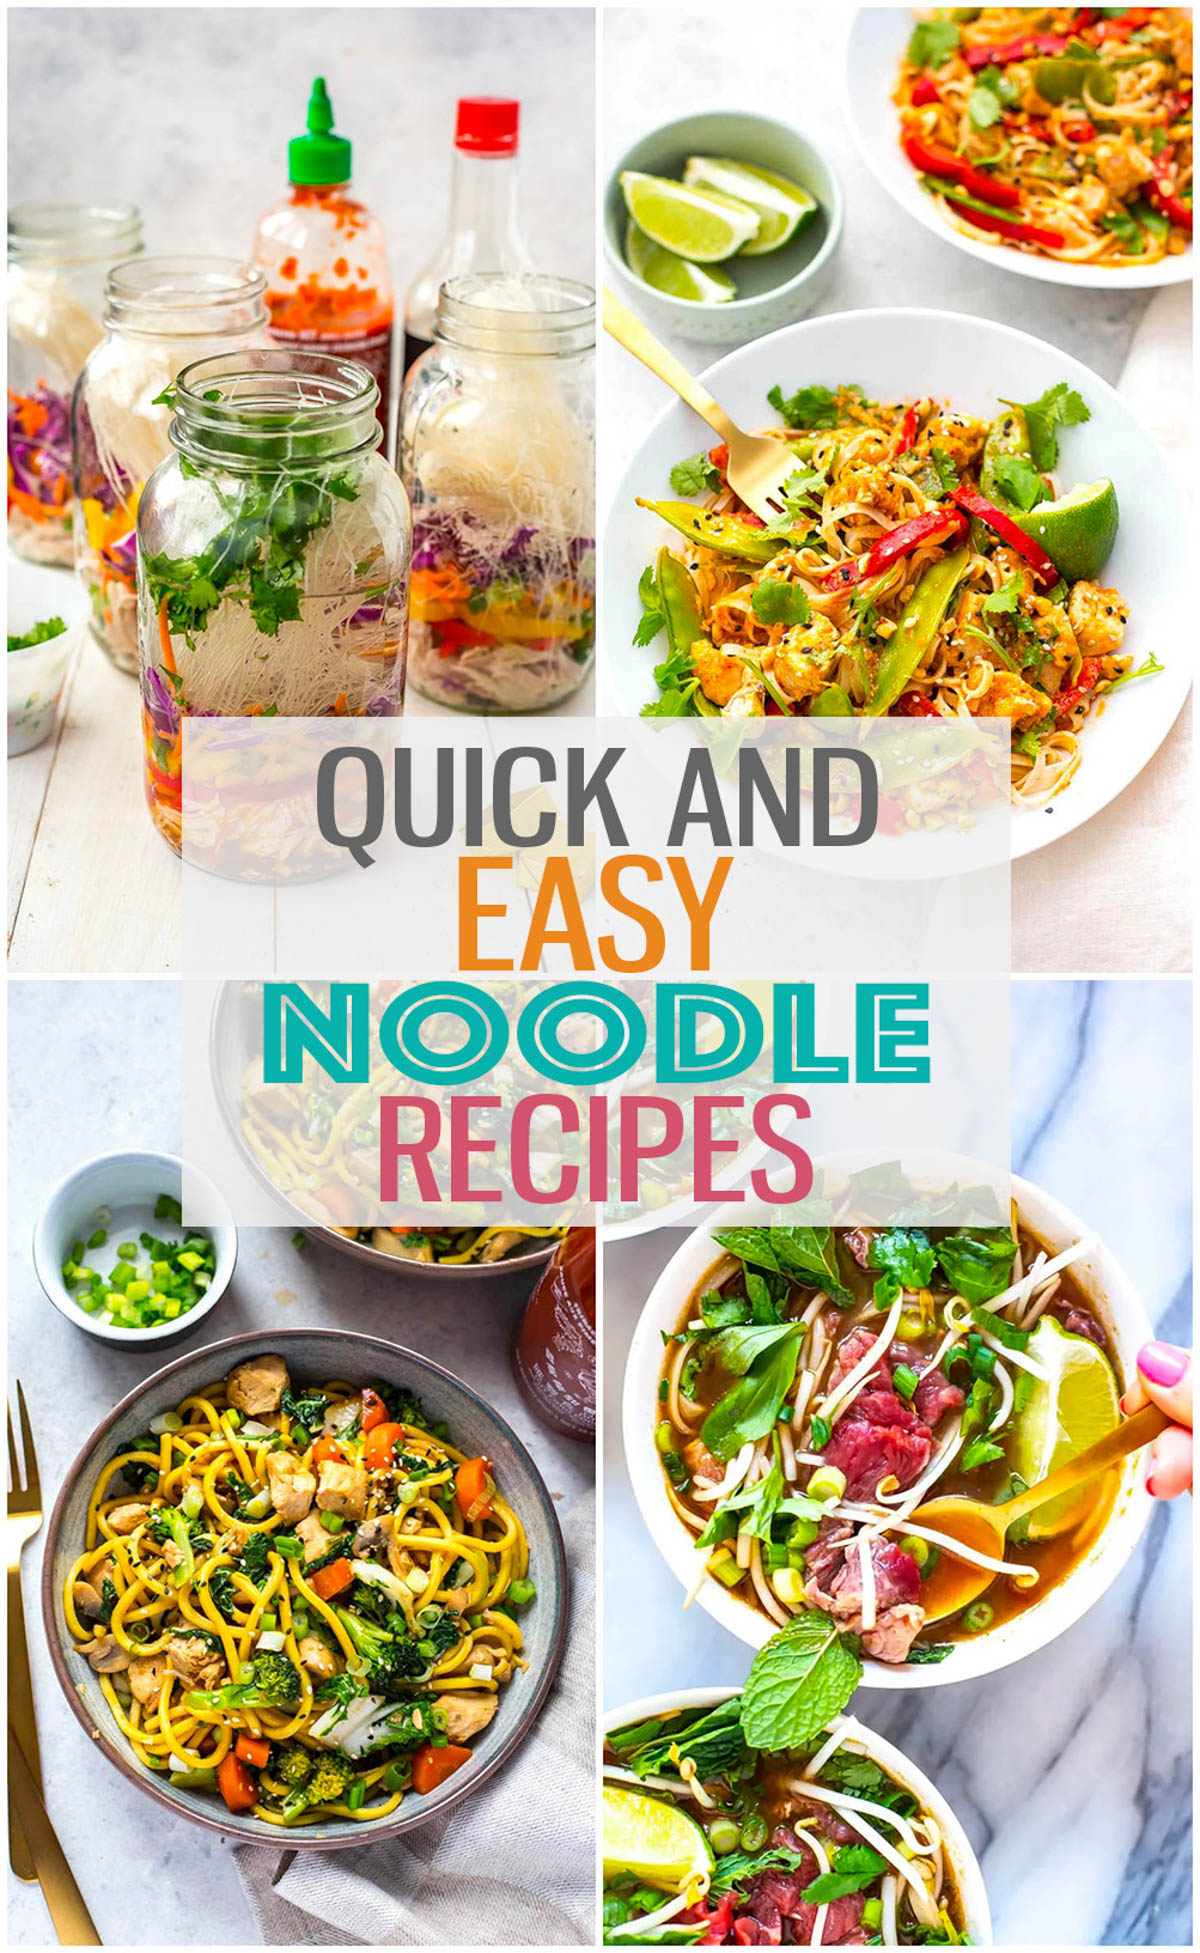 A collage of four noodle recipes with the text "Quick and Easy Noodle Recipes" layered over top.